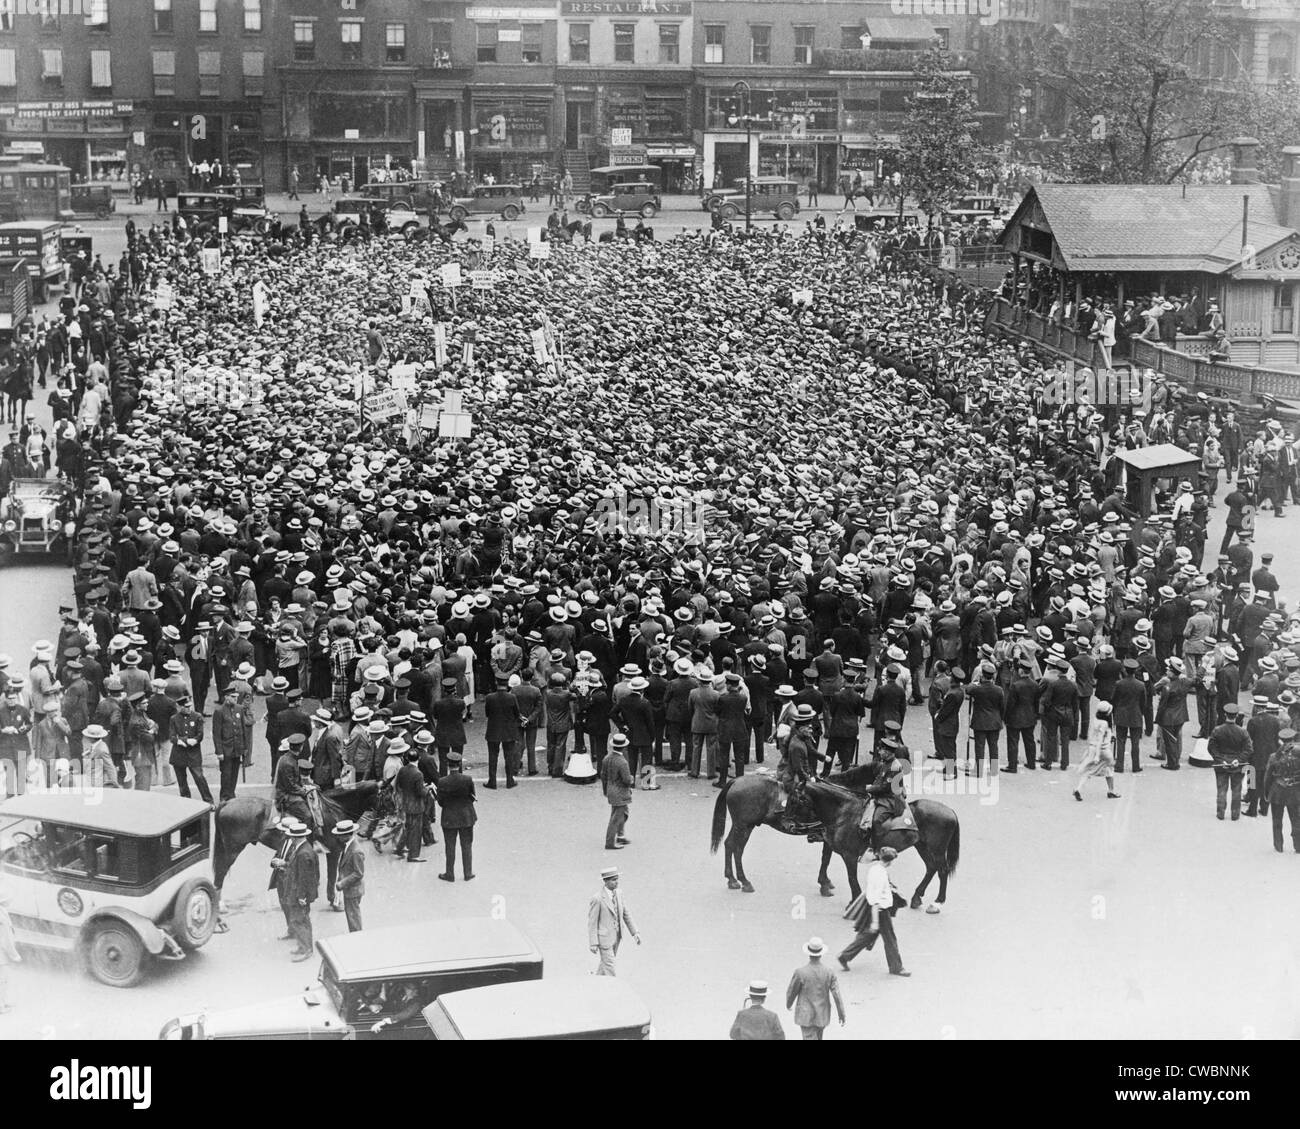 Top 91+ Images europeans rallied in mass protests against the execution of sacco and vanzetti. Superb